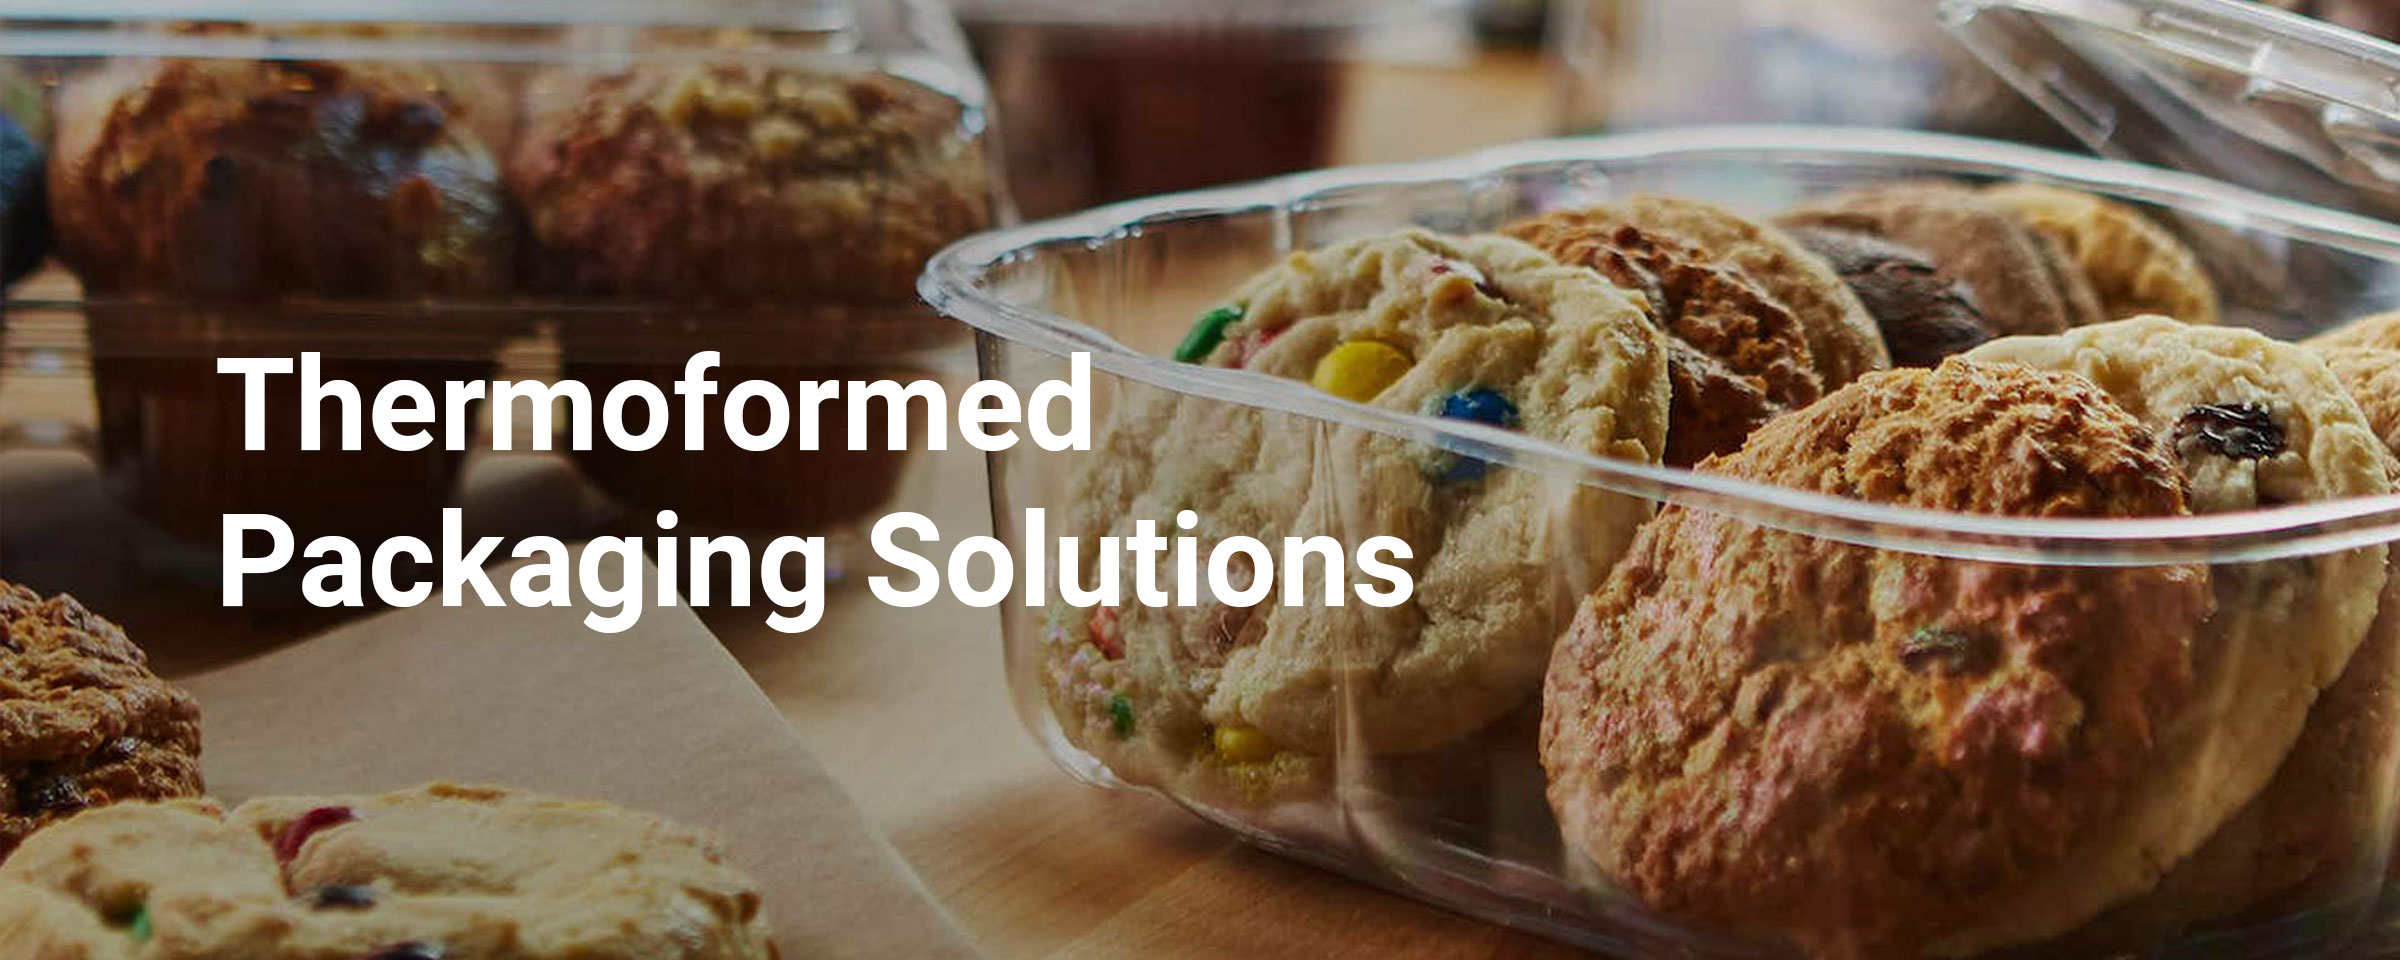 Cookies in a container with words Thermoformed Packaging Solutions